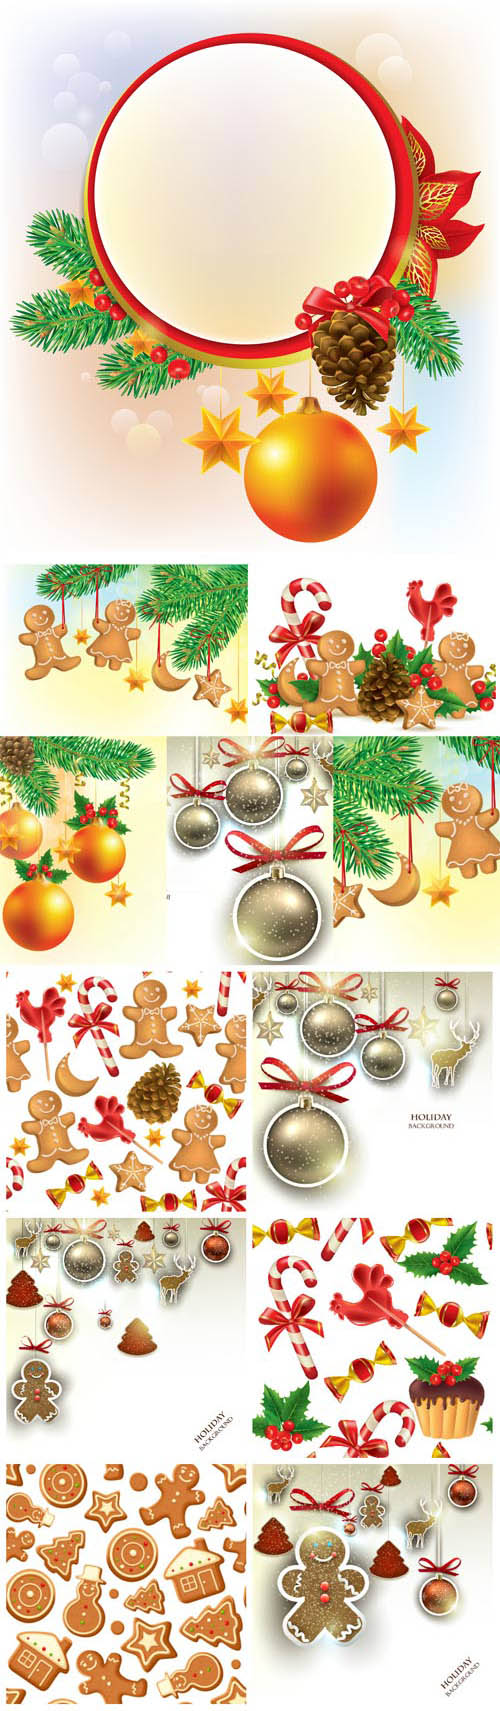 New Year and Christmas illustrations in vector №48